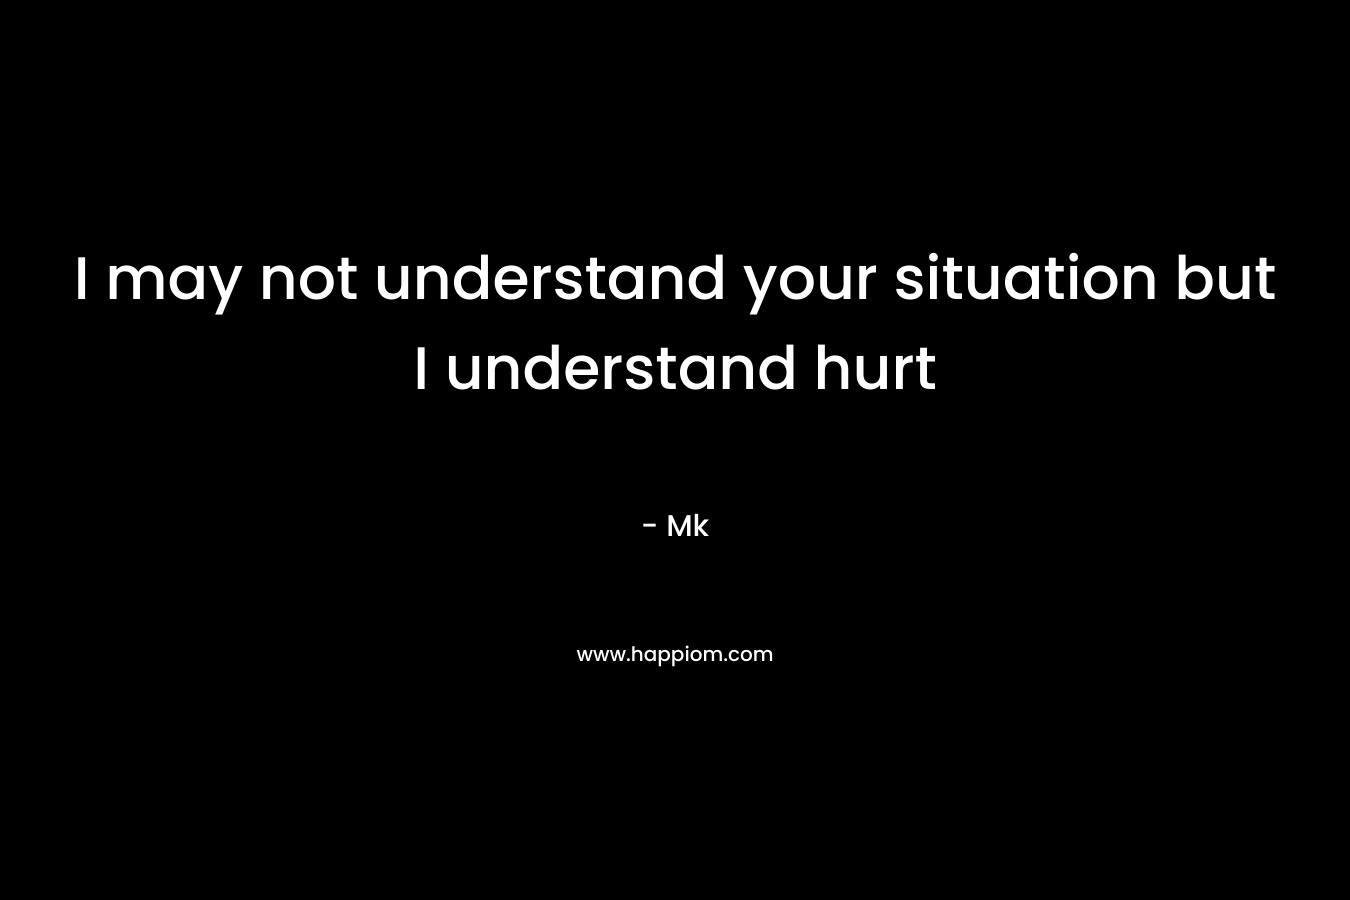 I may not understand your situation but I understand hurt